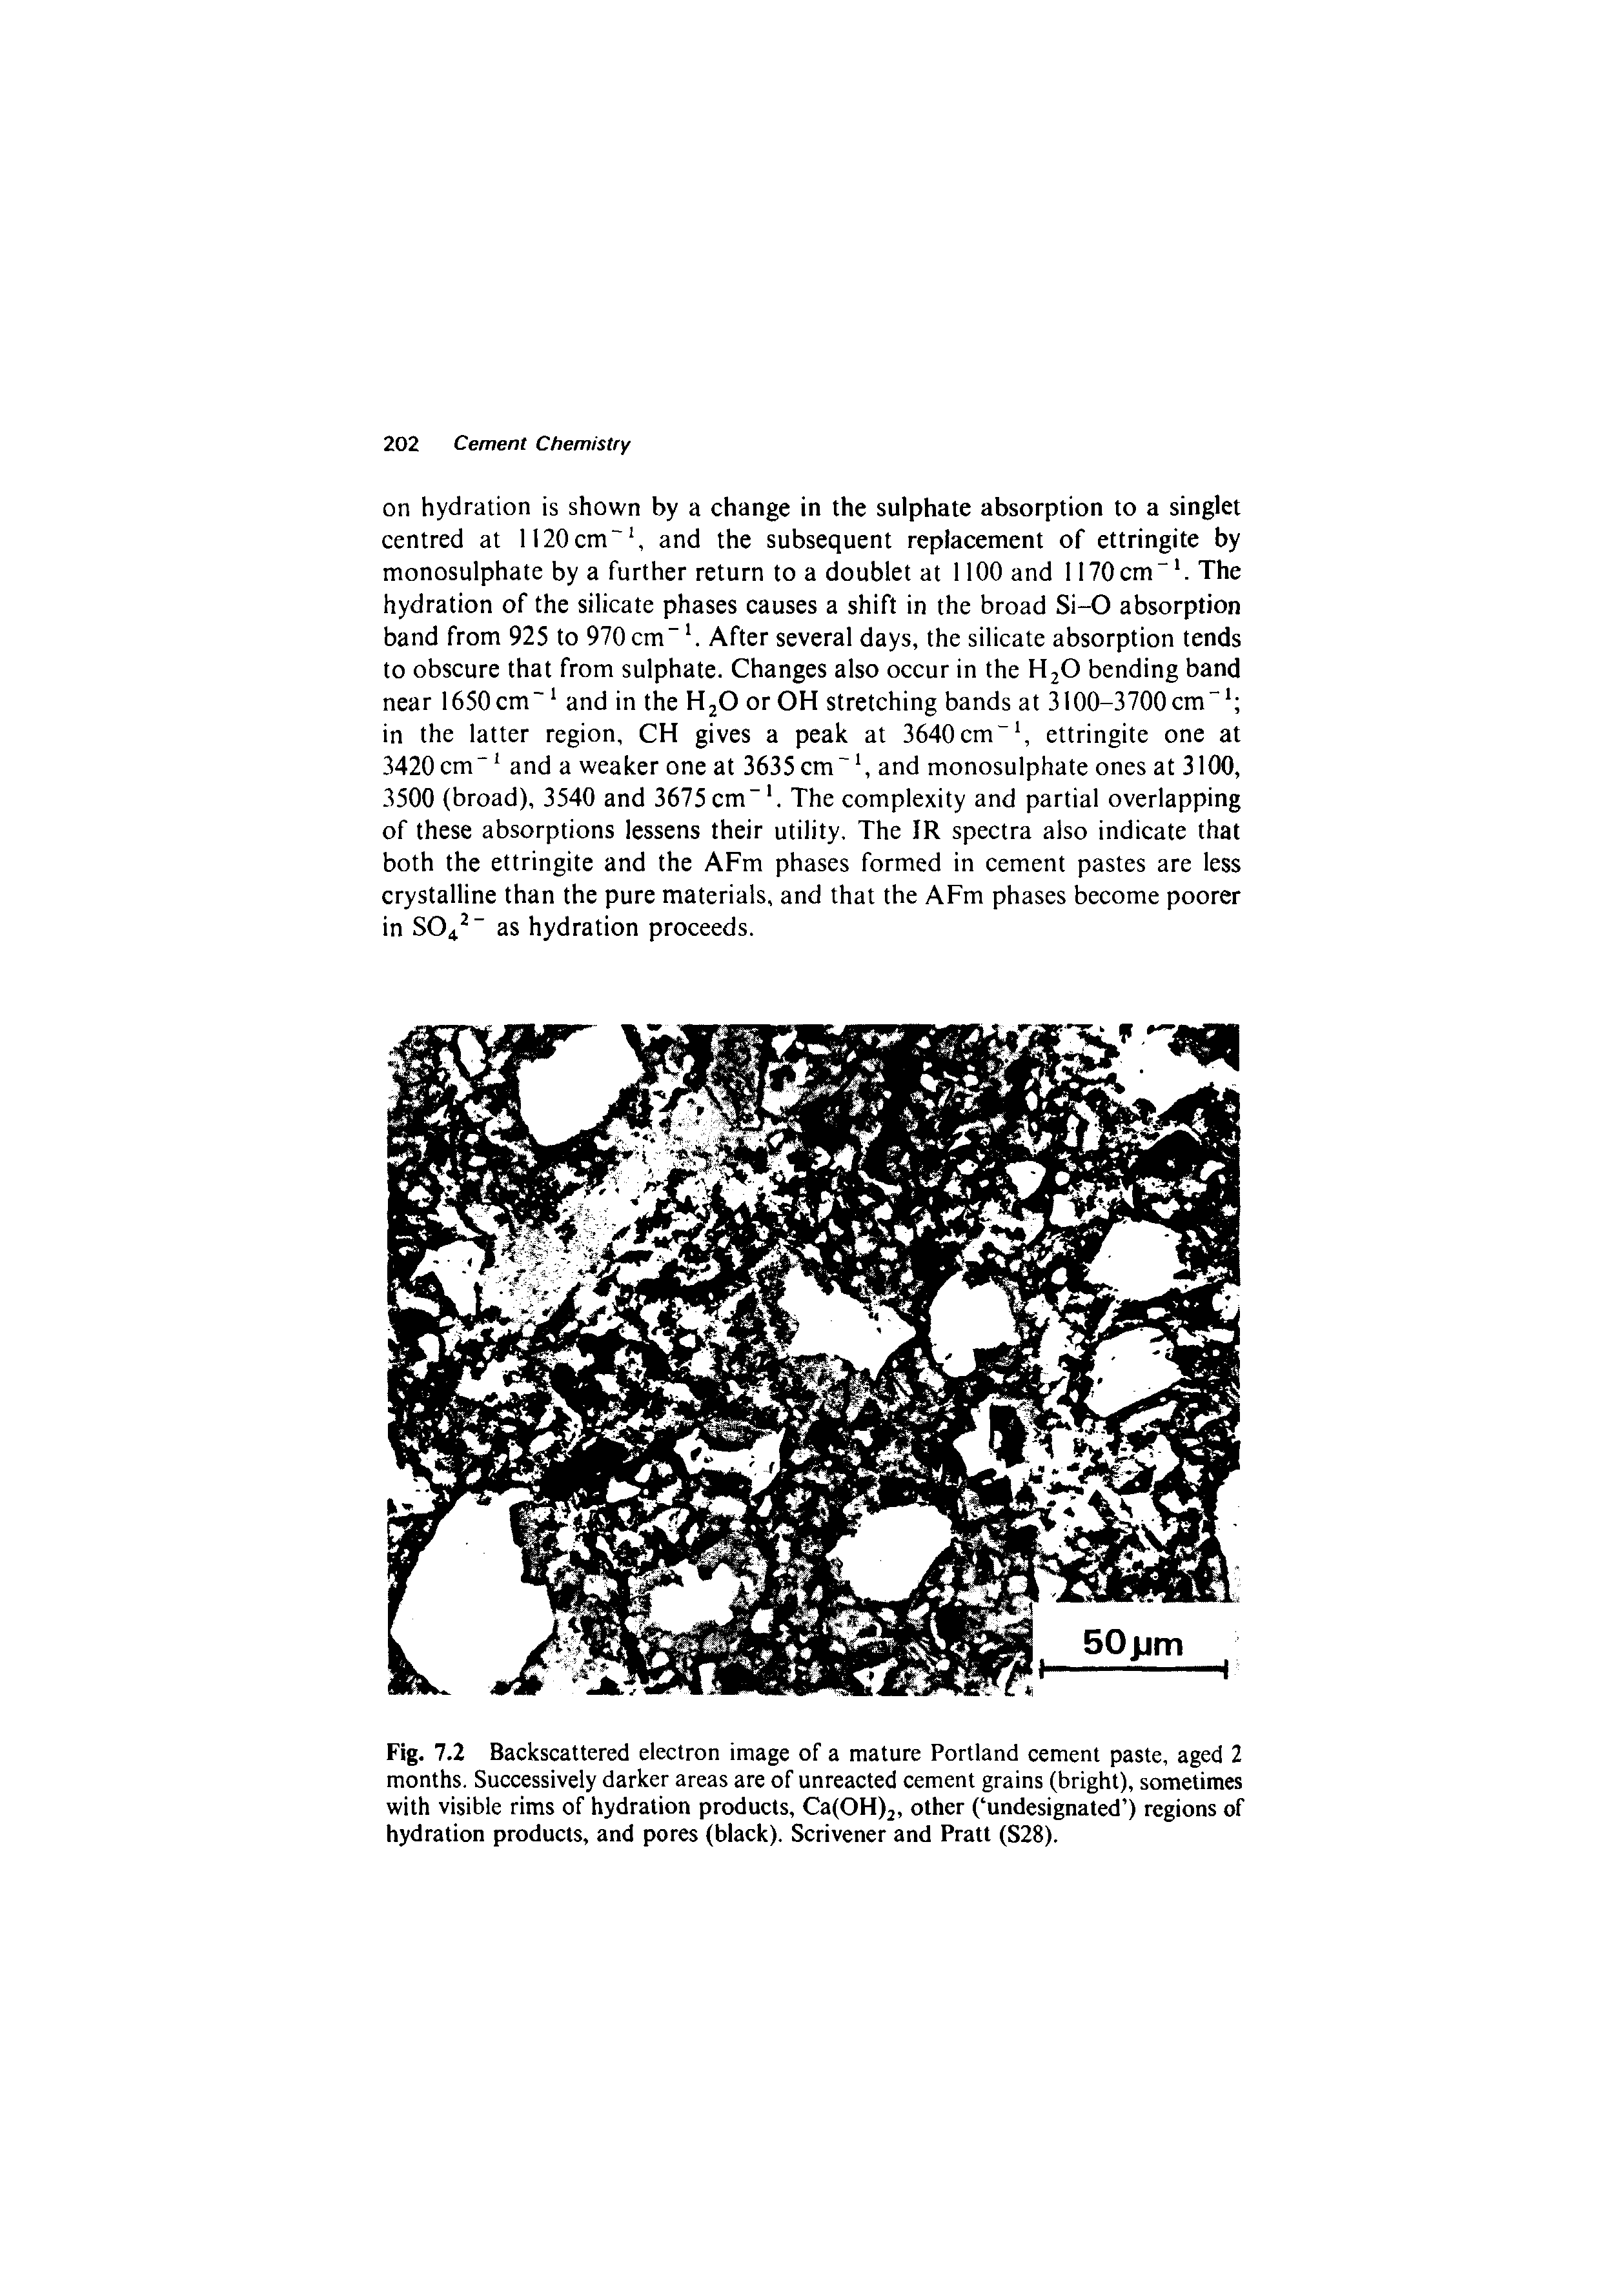 Fig. 7.2 Backscattered electron image of a mature Portland cement paste, aged 2 months. Successively darker areas are of unreacted cement grains (bright), sometimes with visible rims of hydration products, CafOH), other ( undesignated ) regions of hydration products, and pores (black). Scrivener and Pratt (S28).